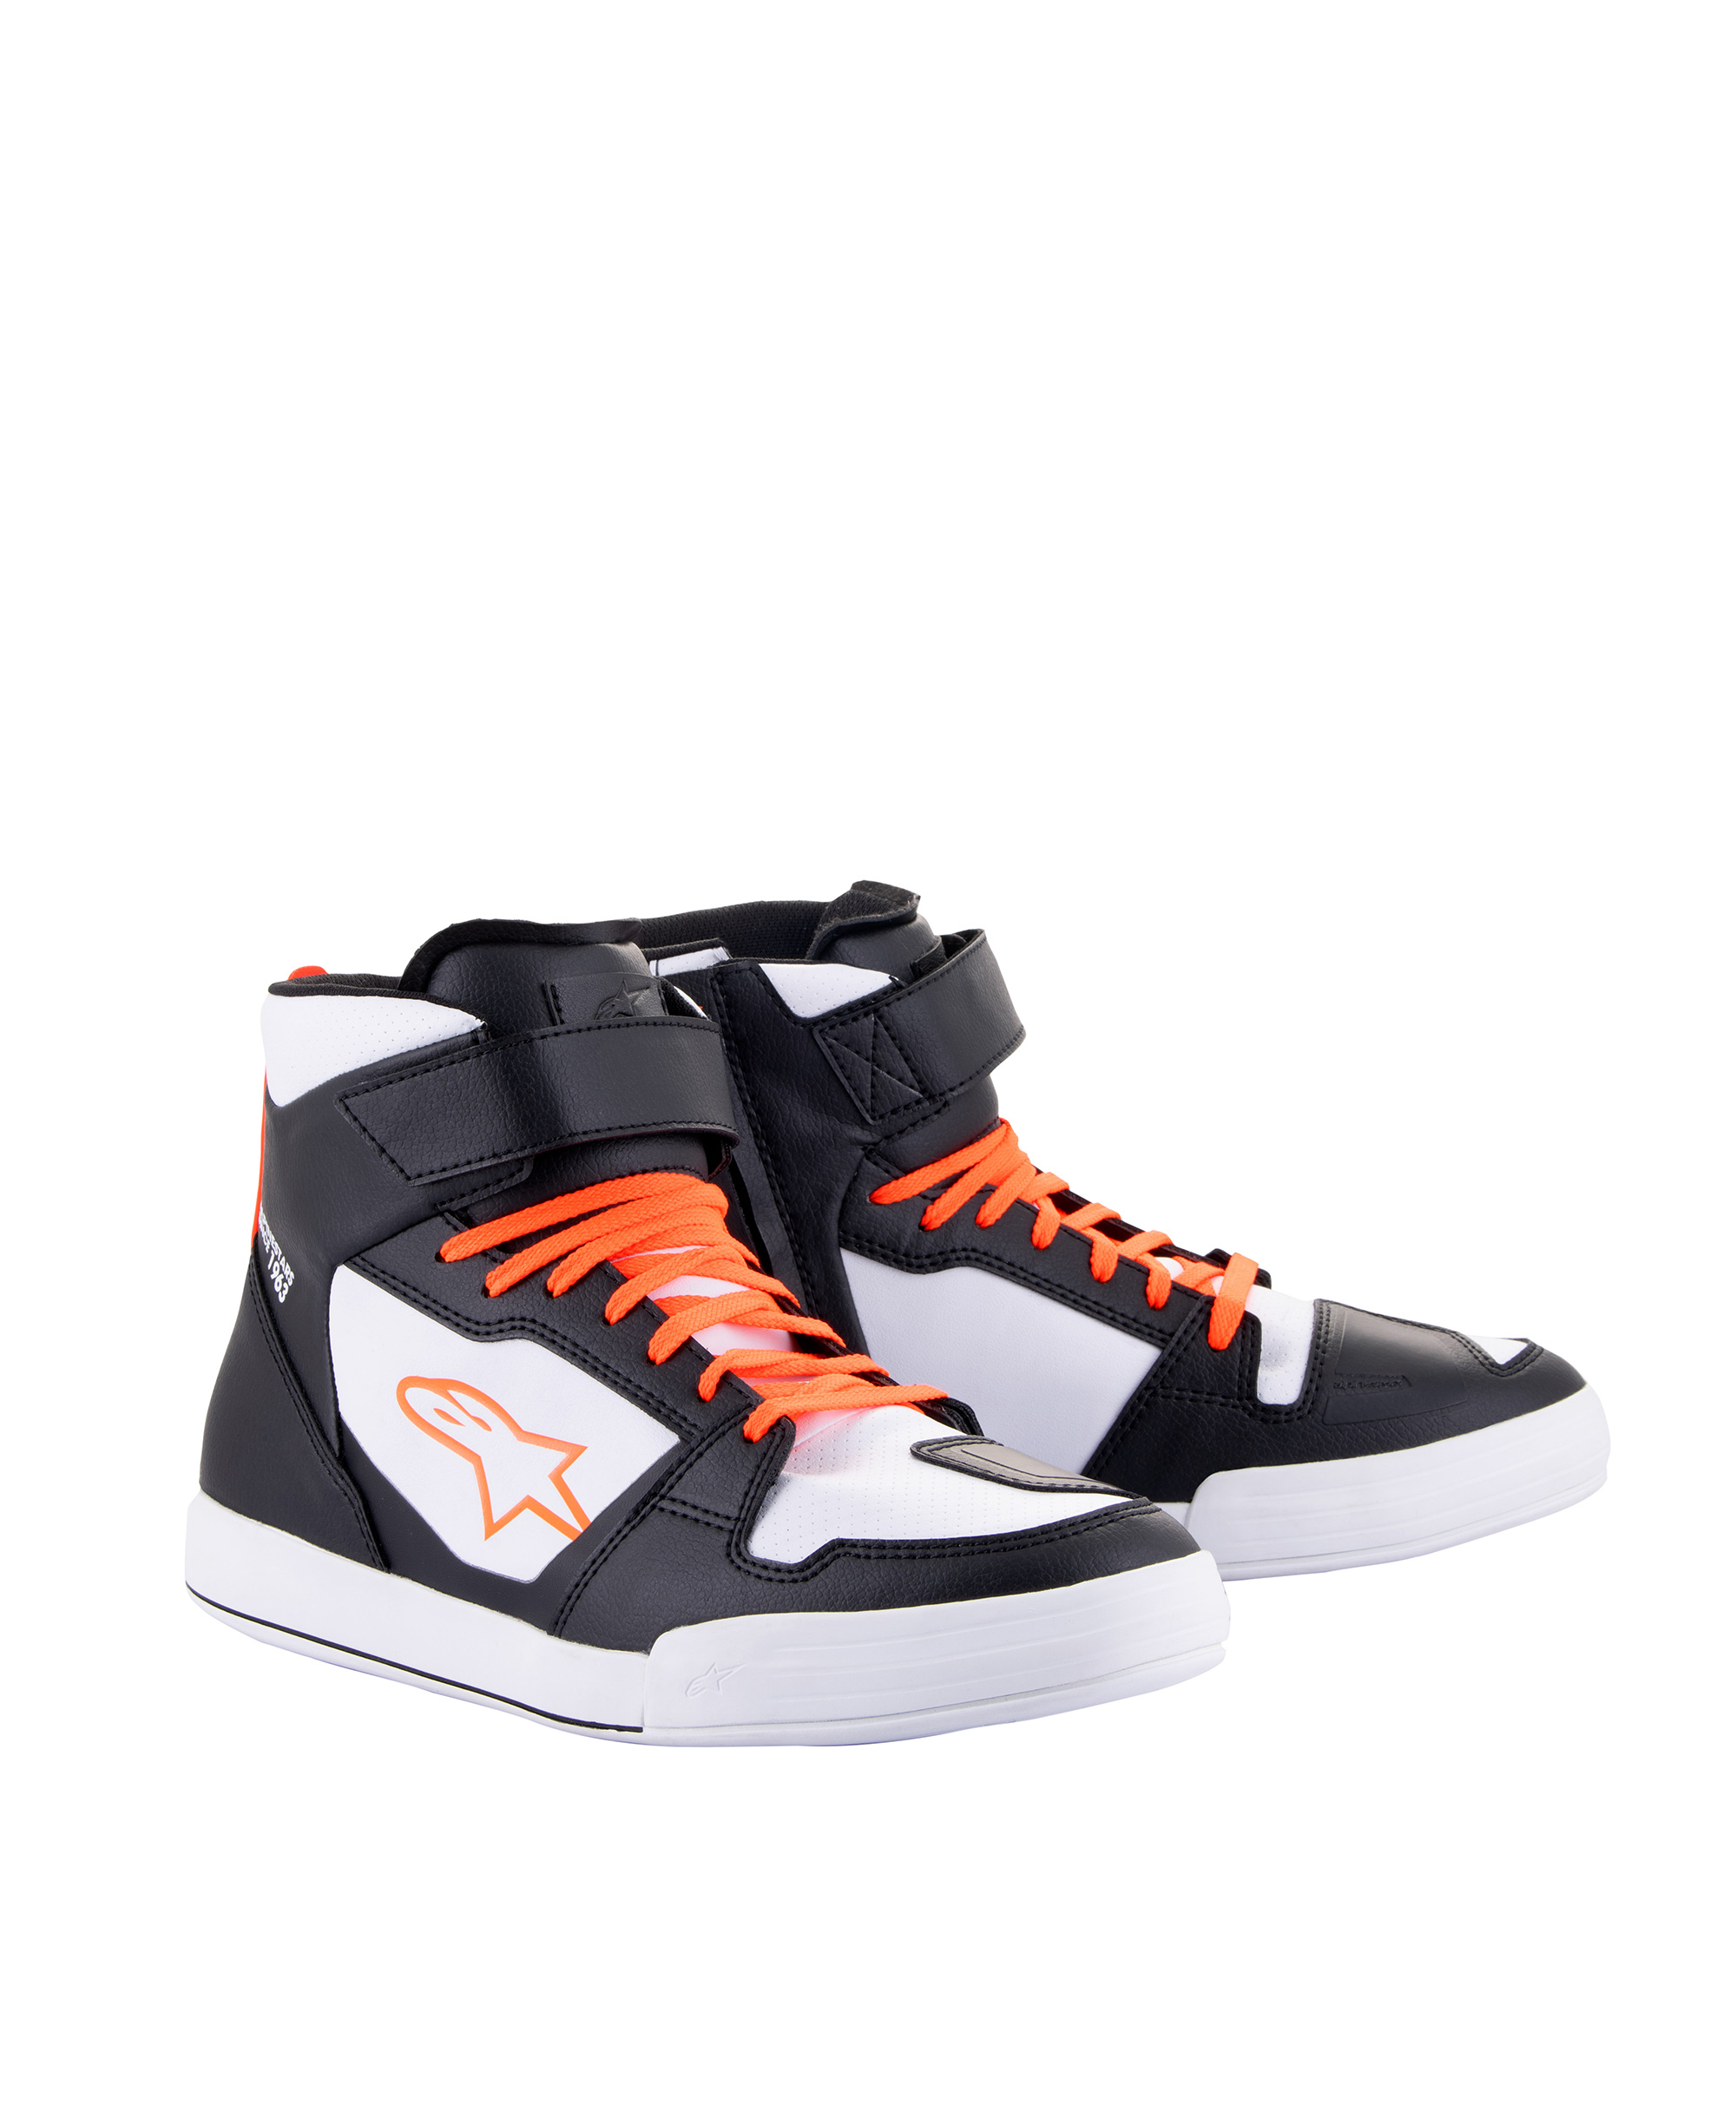 AXIOM SHOES *ASIA BLACK WHITE RED FLUO